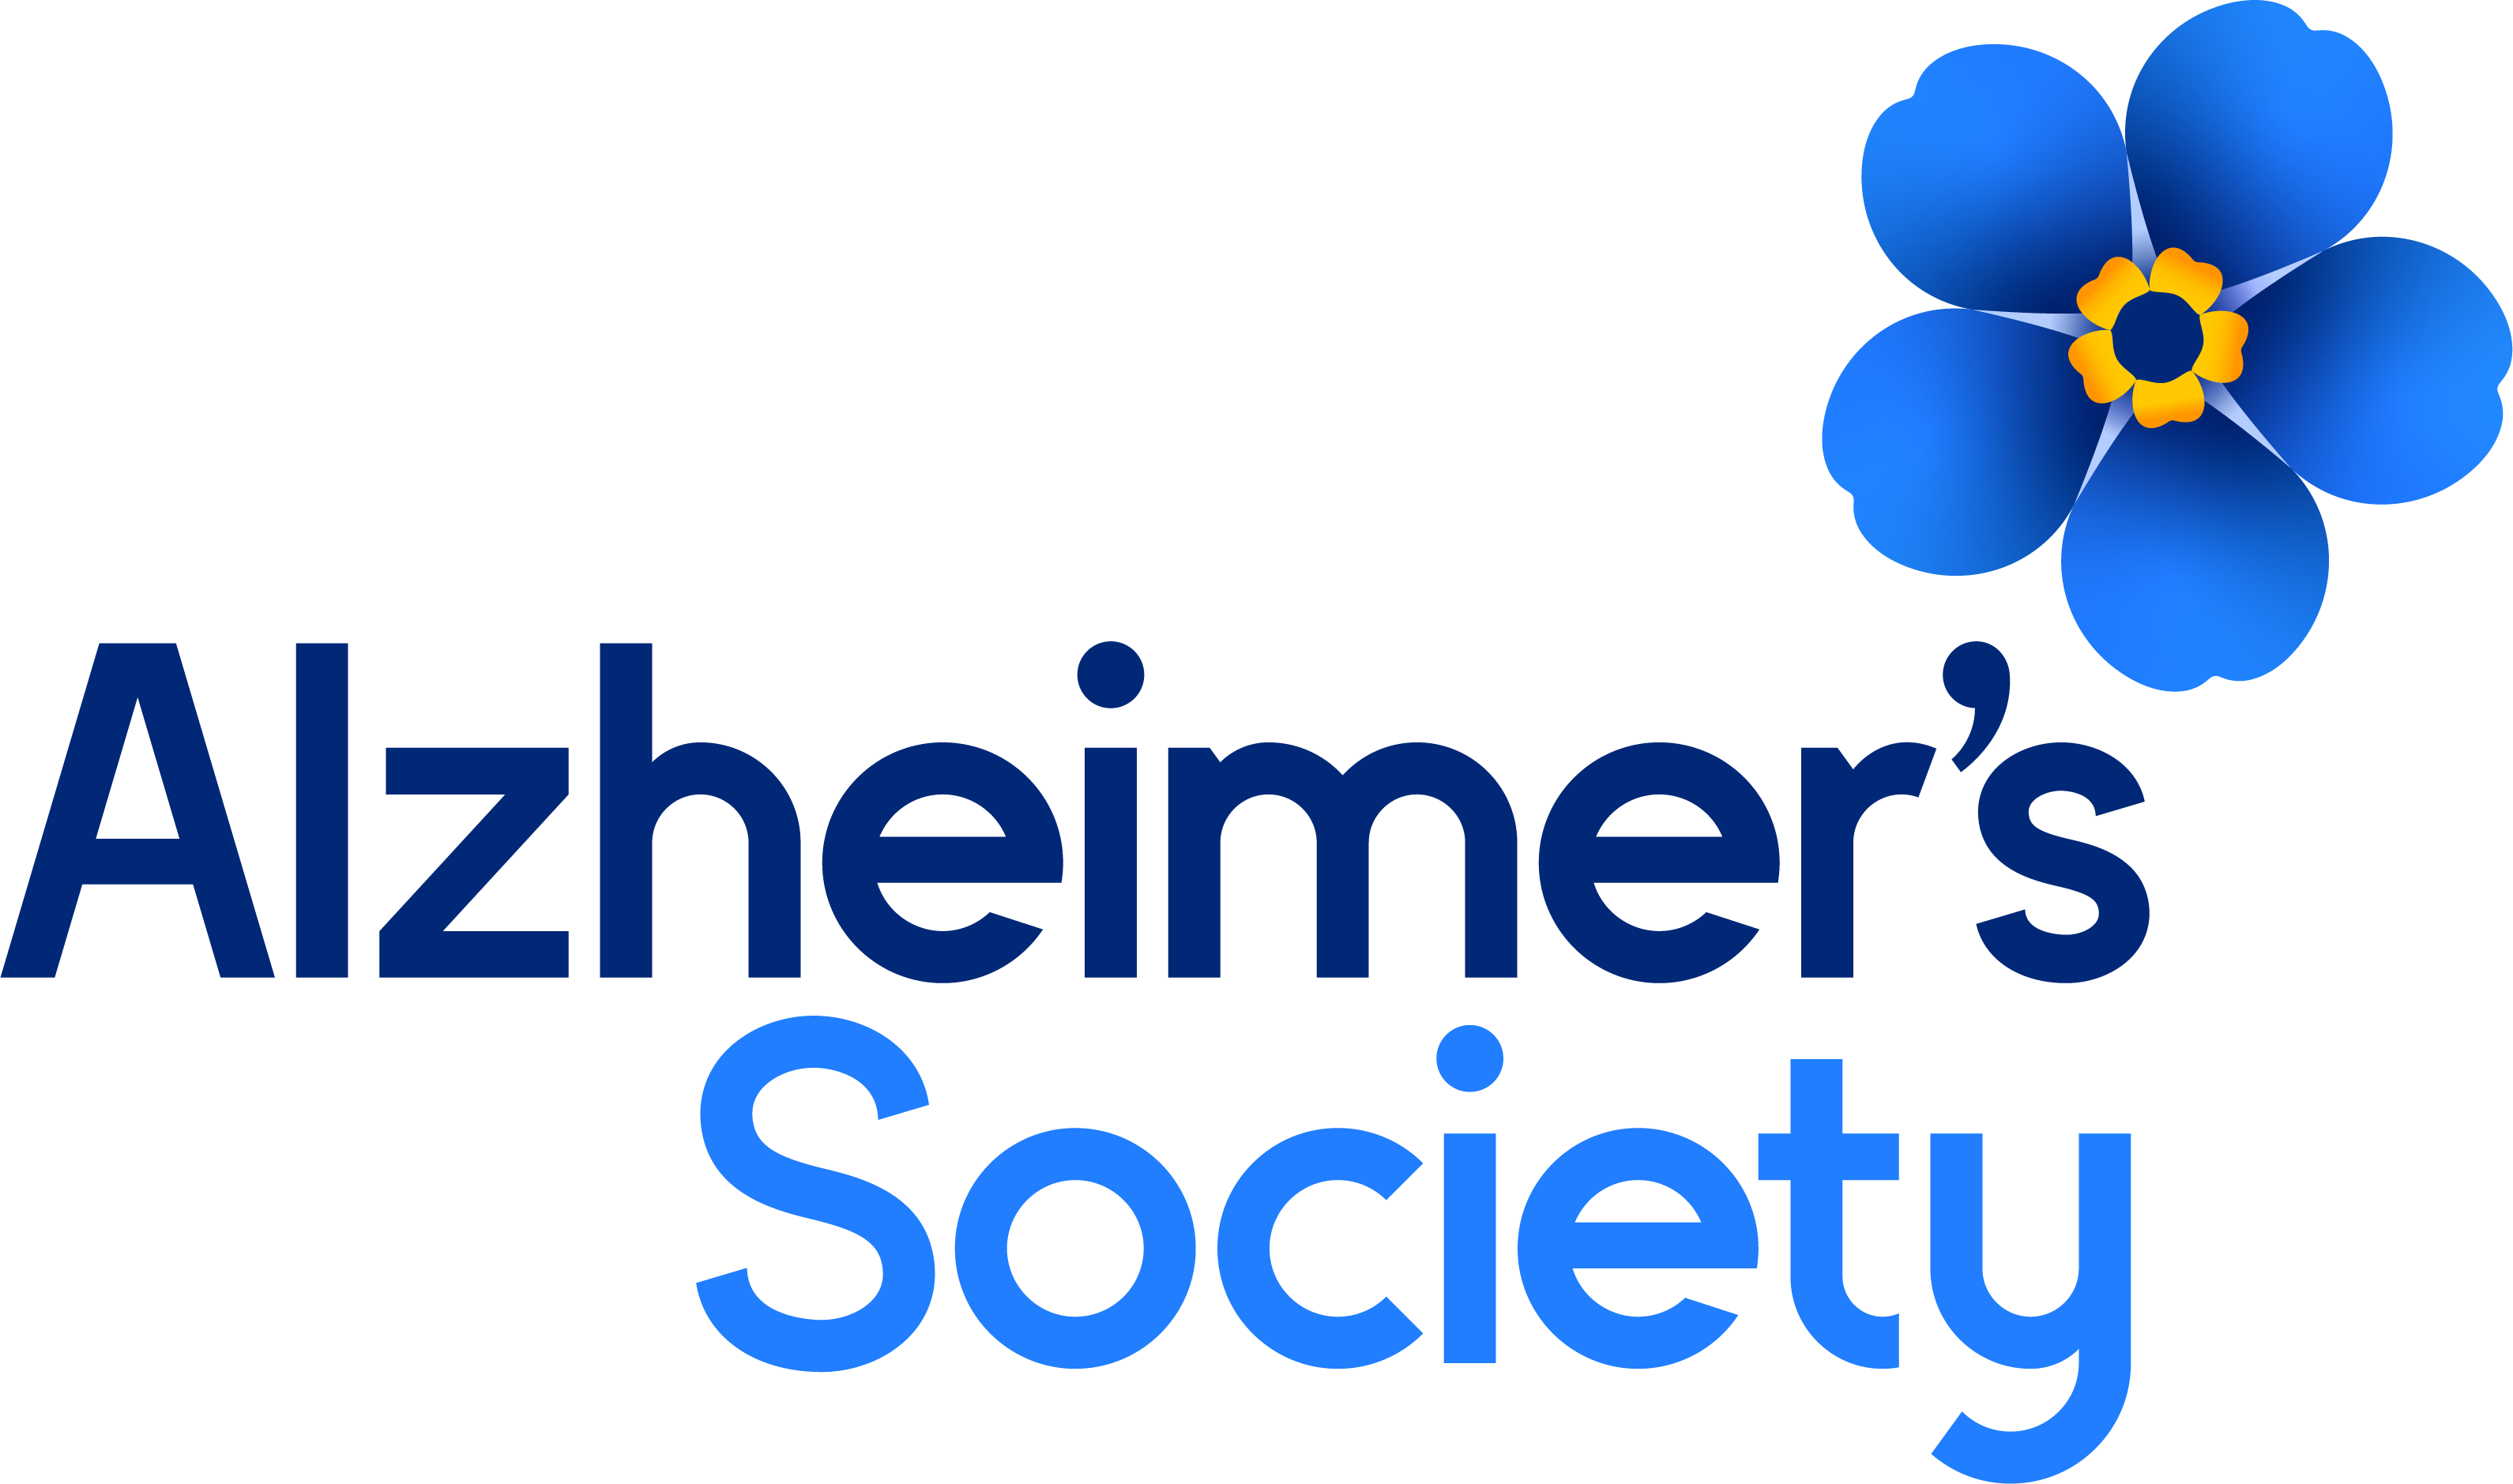 Alzheimers Society Home - Opens in a new tab